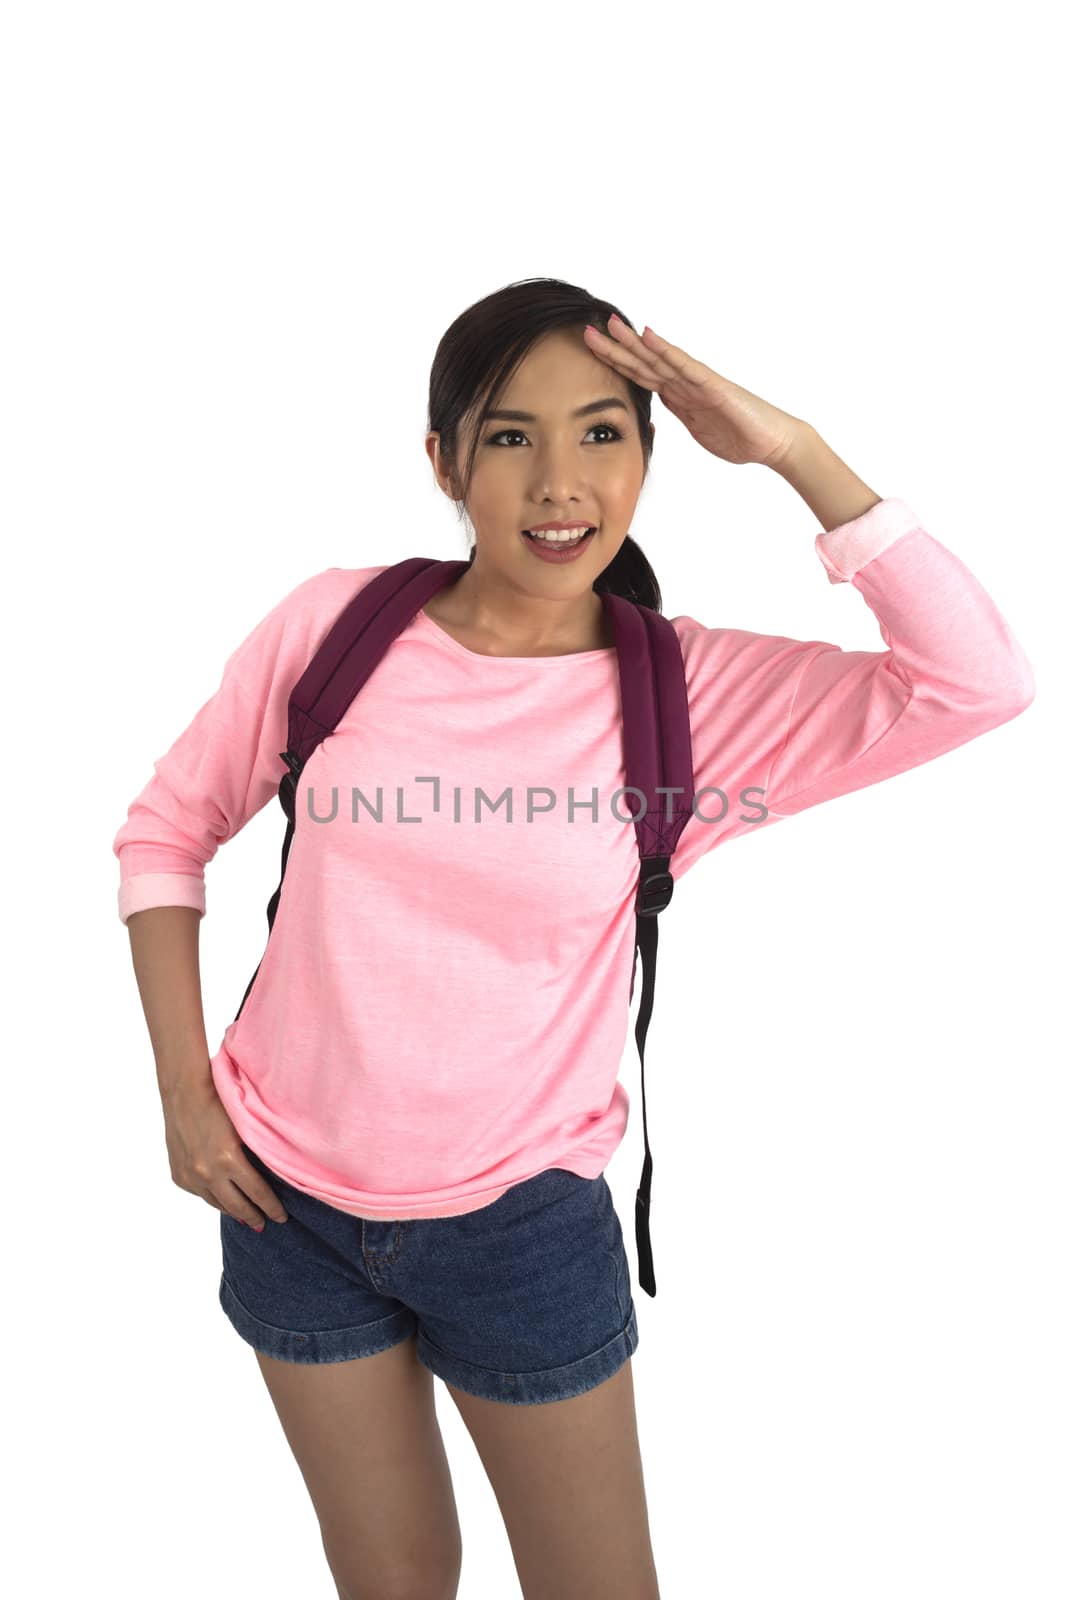 Asian girl in pink t-shirt and blue jean shorts with backpack lo by pandpstock_002